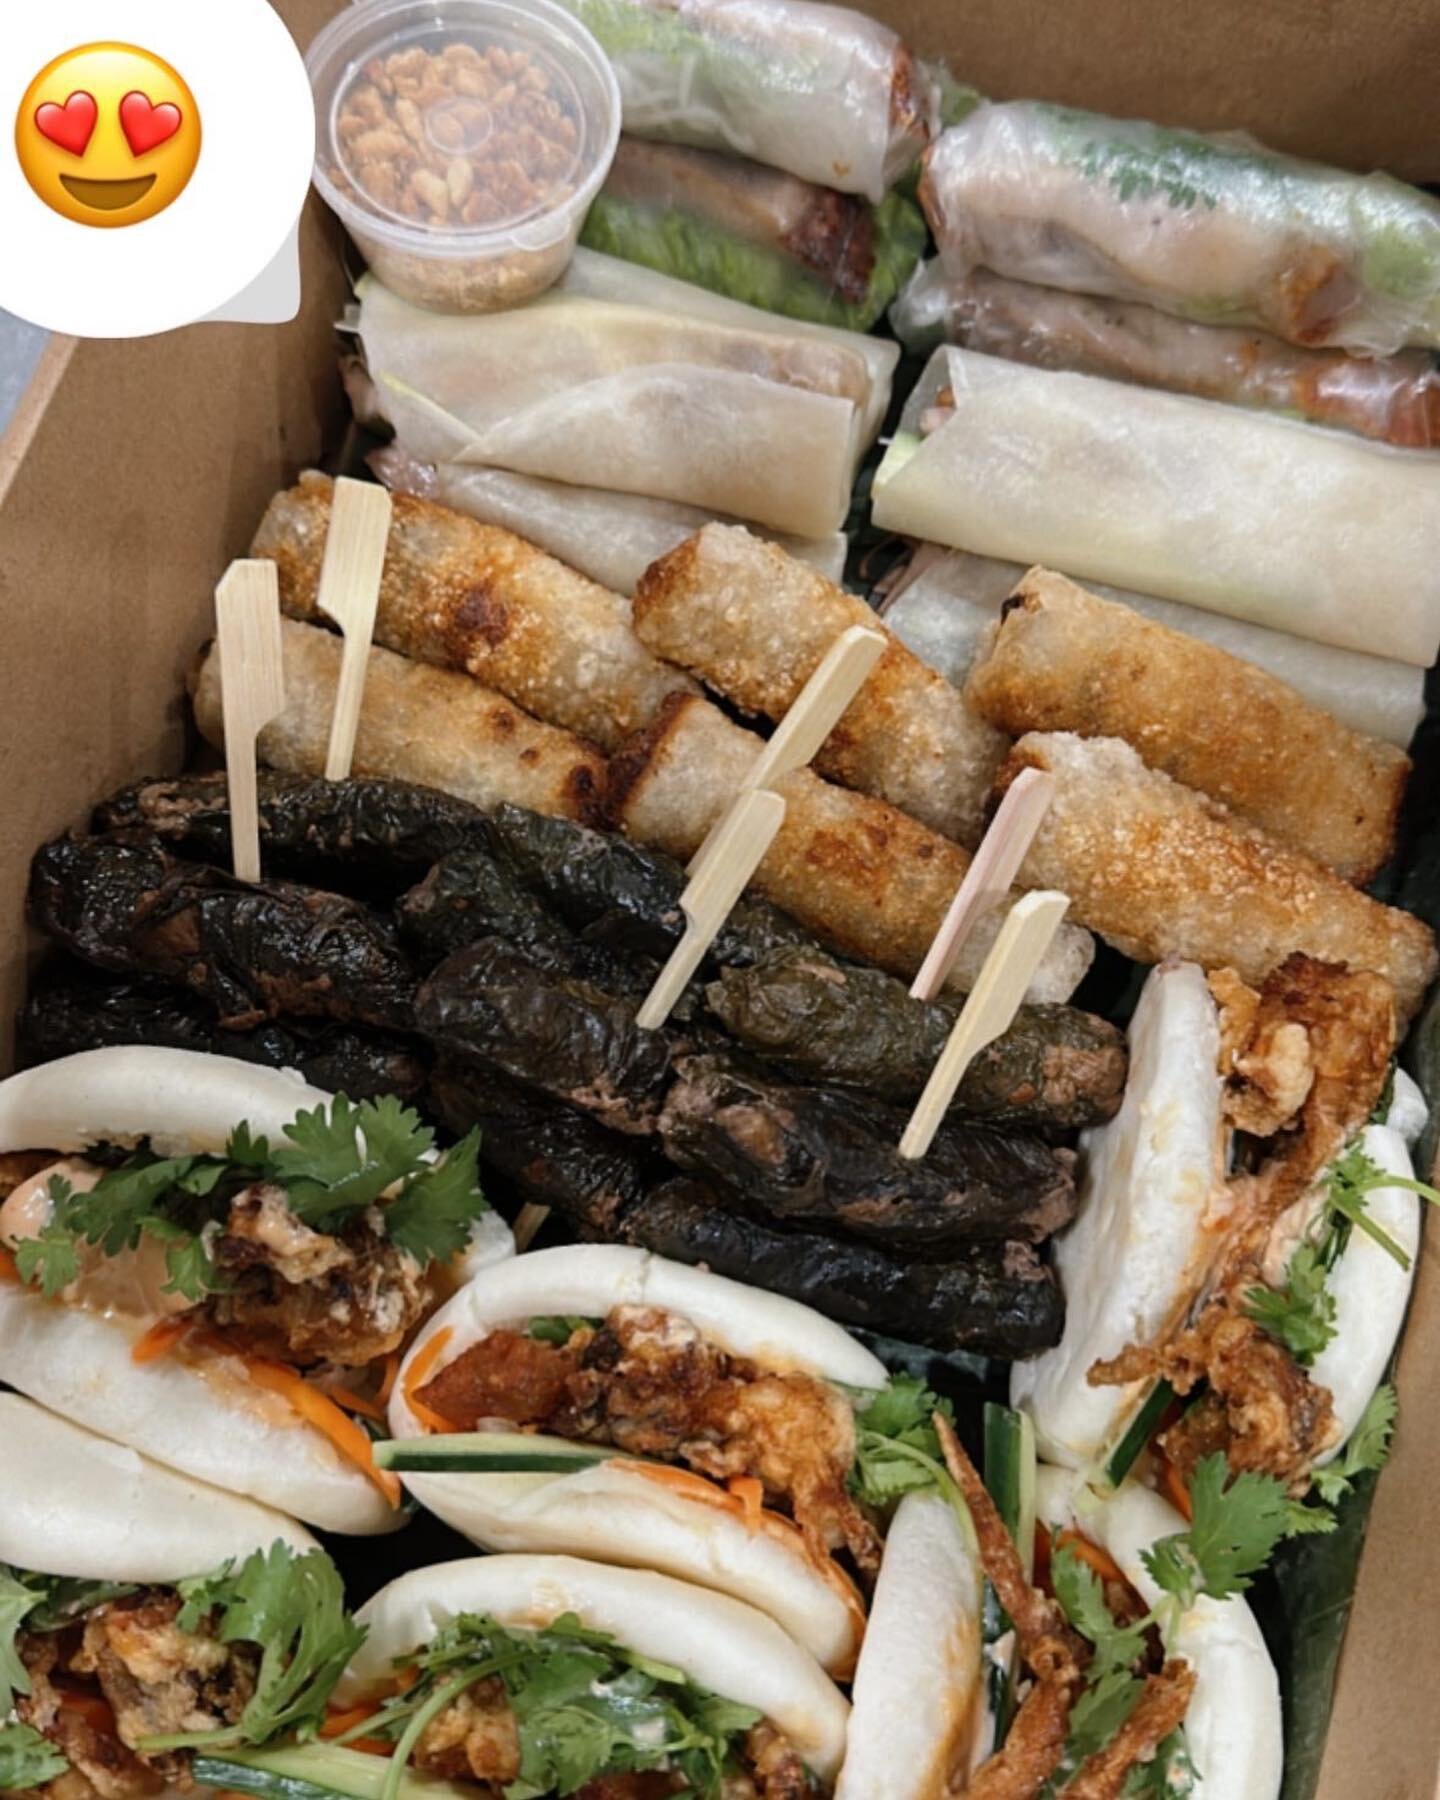 S N A C K B O X by N N Q 

Peking Duck Pancake
Hanoi Spring Roll
Soft Shell Crab Bao 
Beef Betel Cigar Stick 

$19 per person. Perfect choice for garden picnic, group gathering, hen night, birthday or corporation lunch. 

#adelaidecocktail #adelaidef